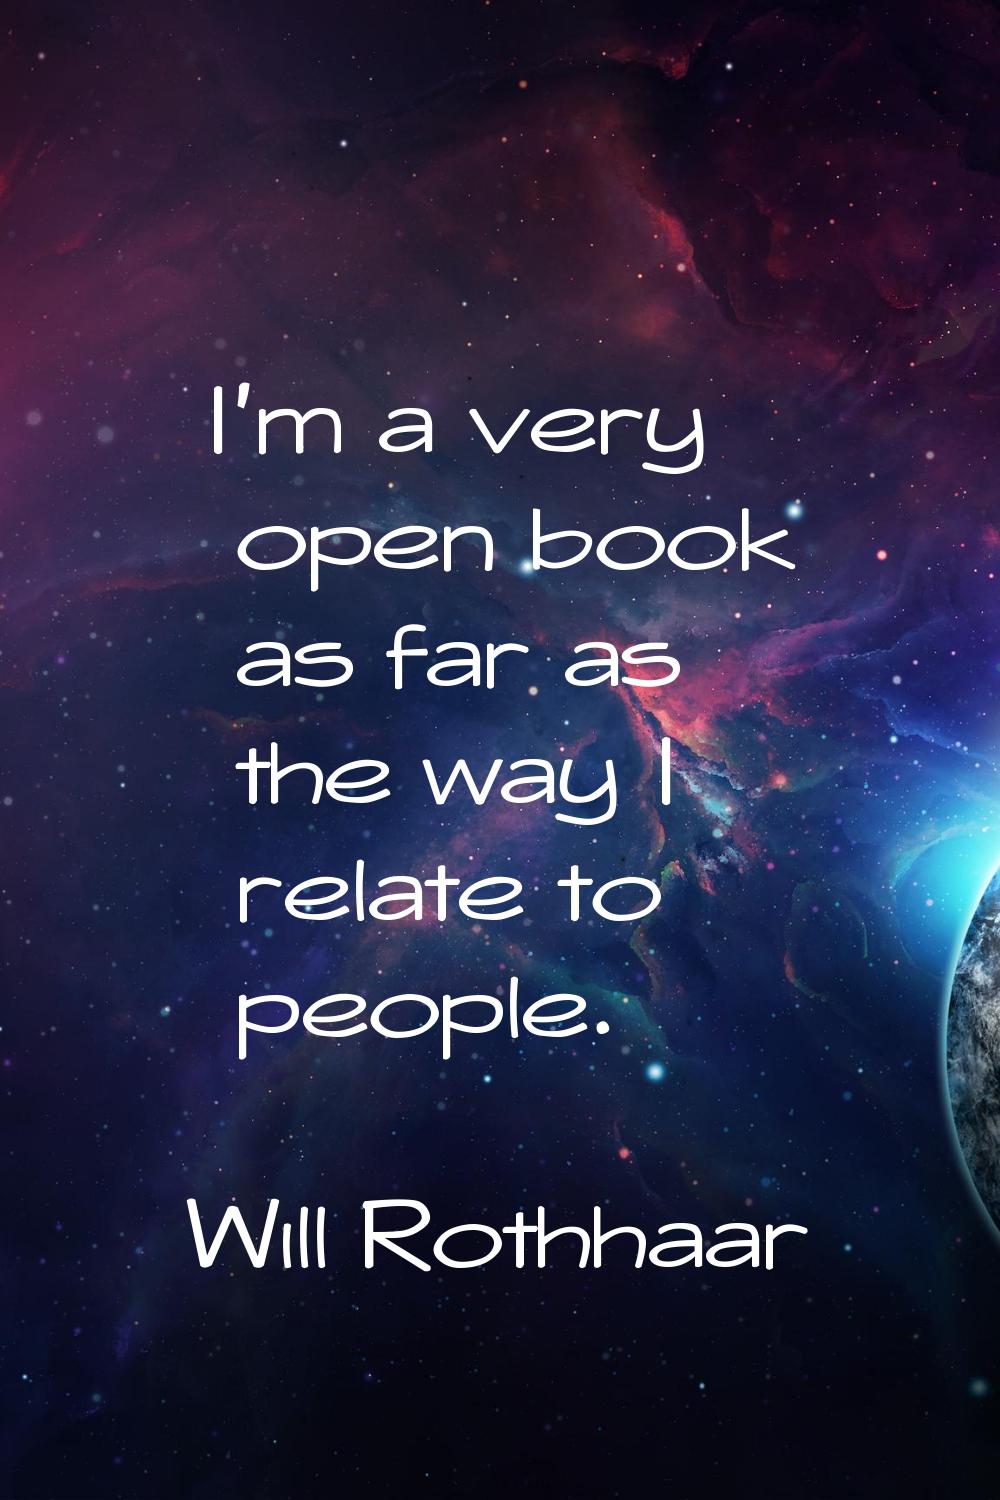 I'm a very open book as far as the way I relate to people.